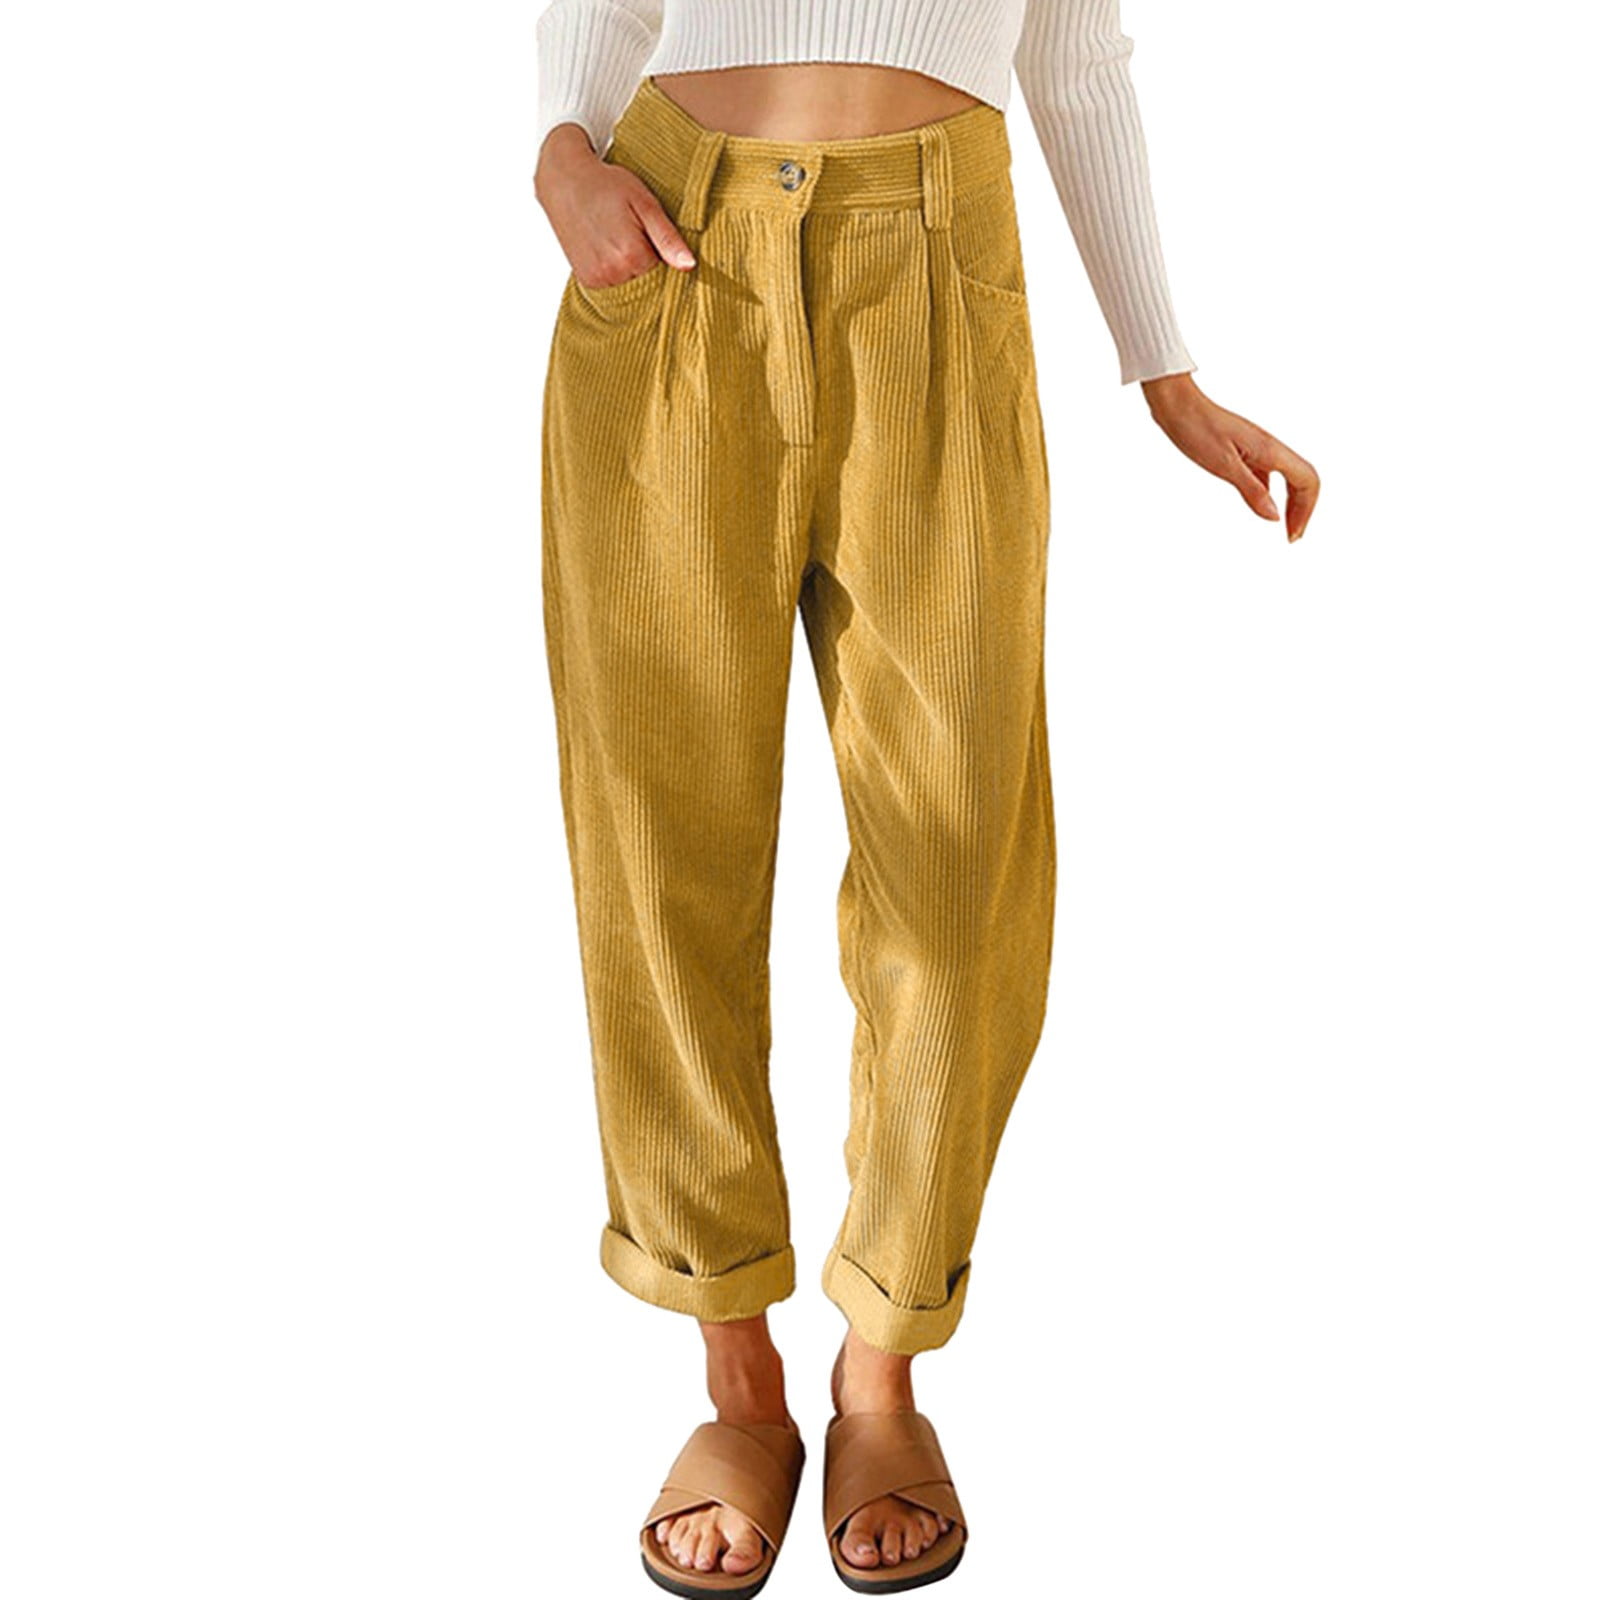 gvdentm Maternity Pants Women's Casual Corduroy Pants Comfy Pull on Elastic  Waist Trousers Drawstring Cotton Pants For Women 